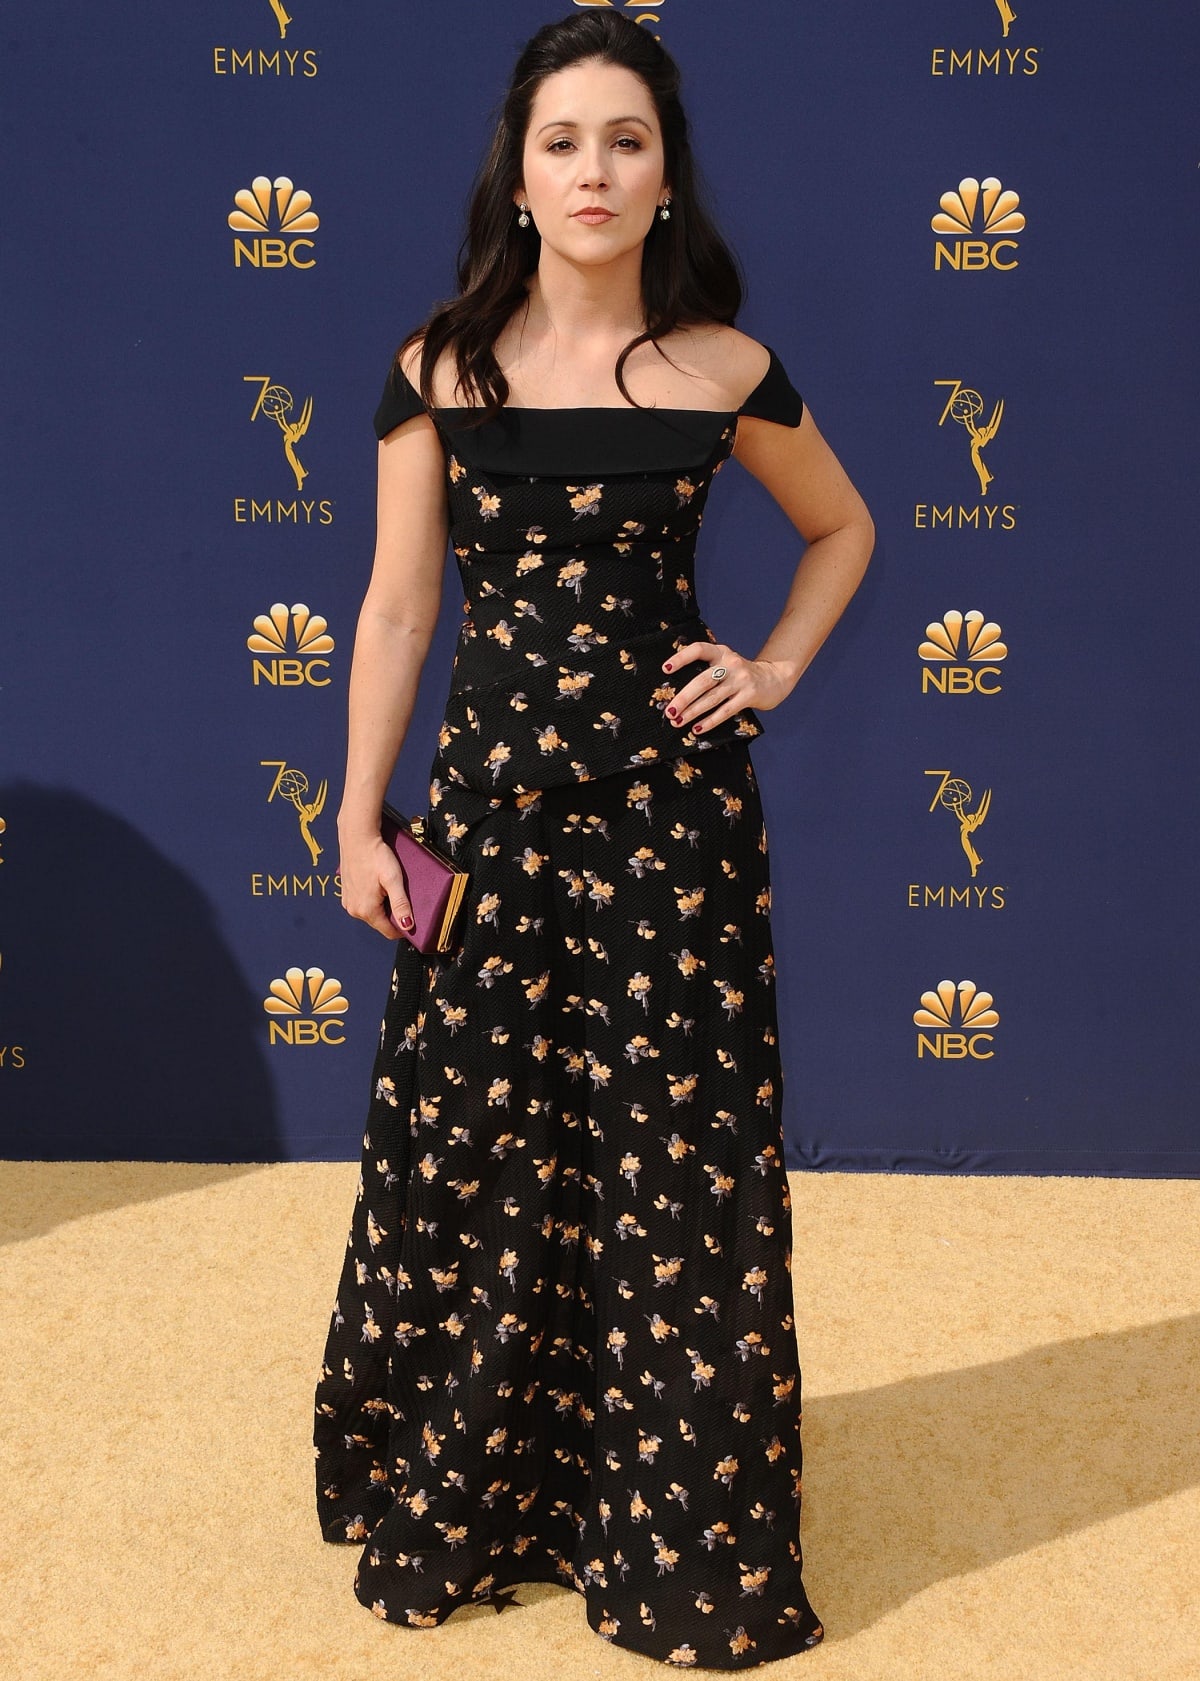 Shannon Woodward attending the 70th Primetime Emmy Awards